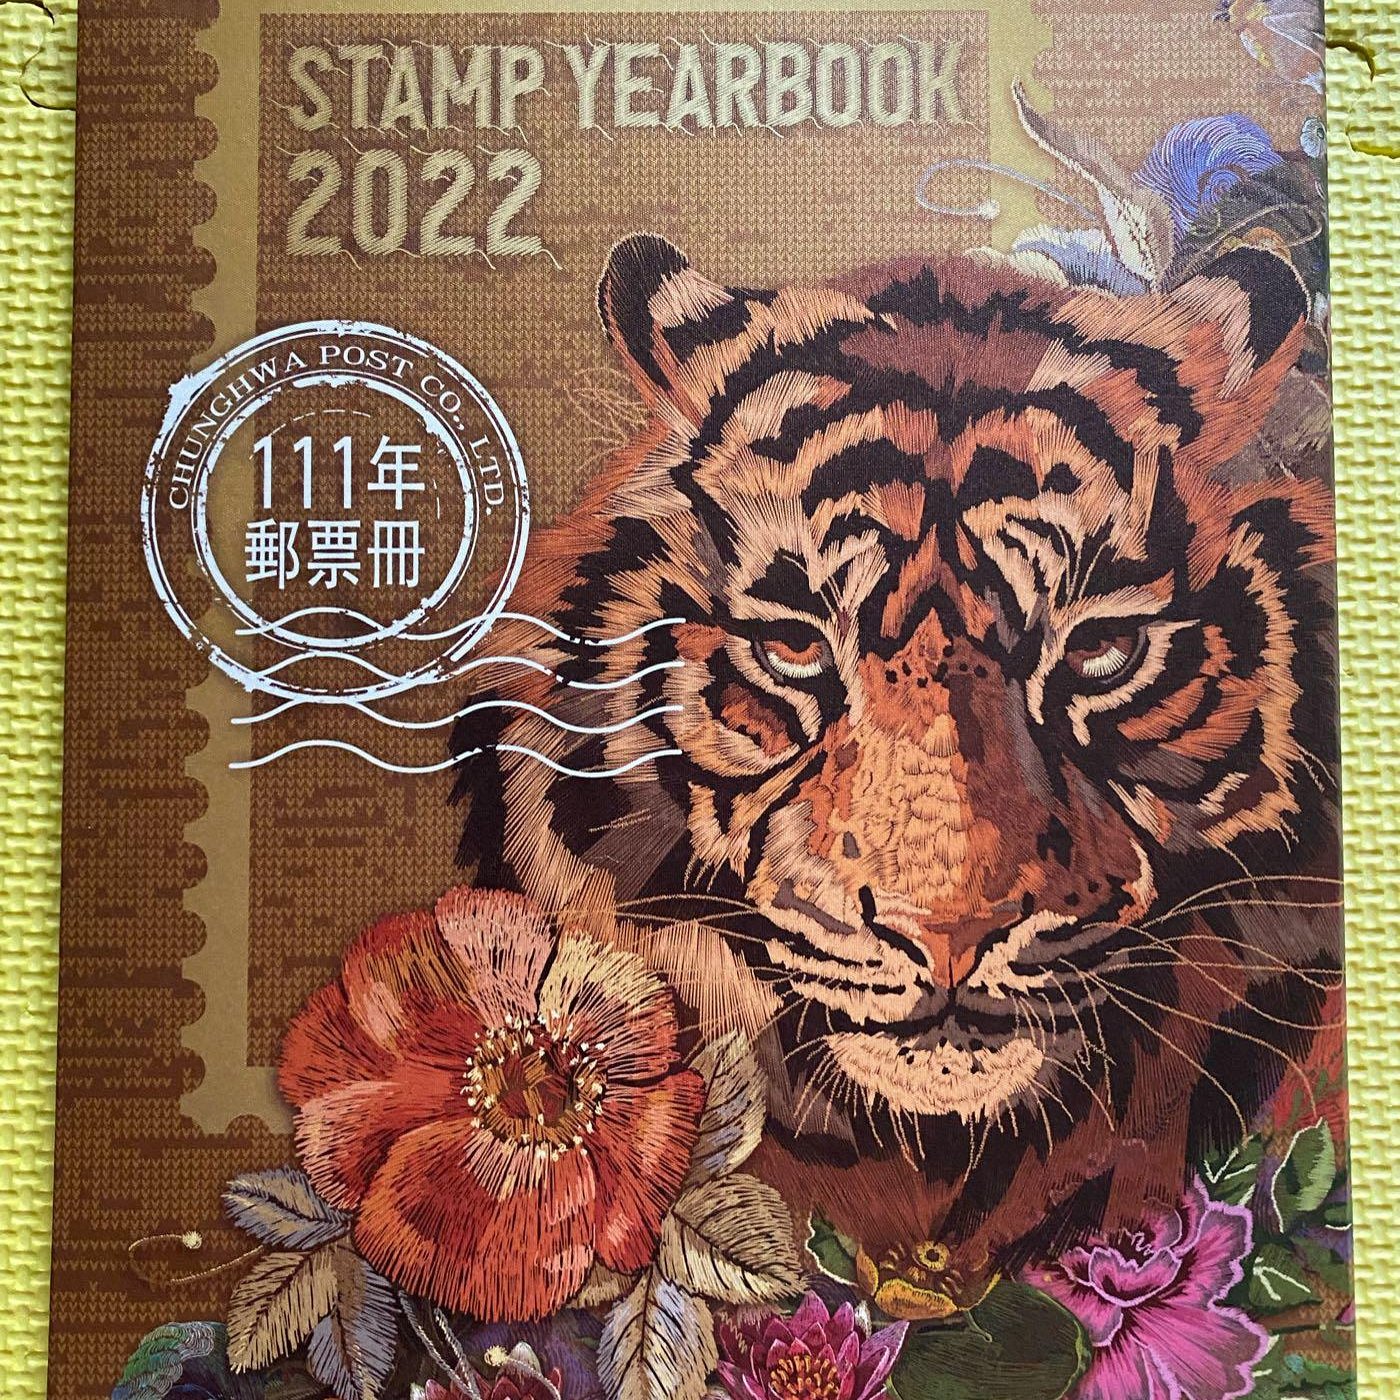 2022 Stamp Yearbook